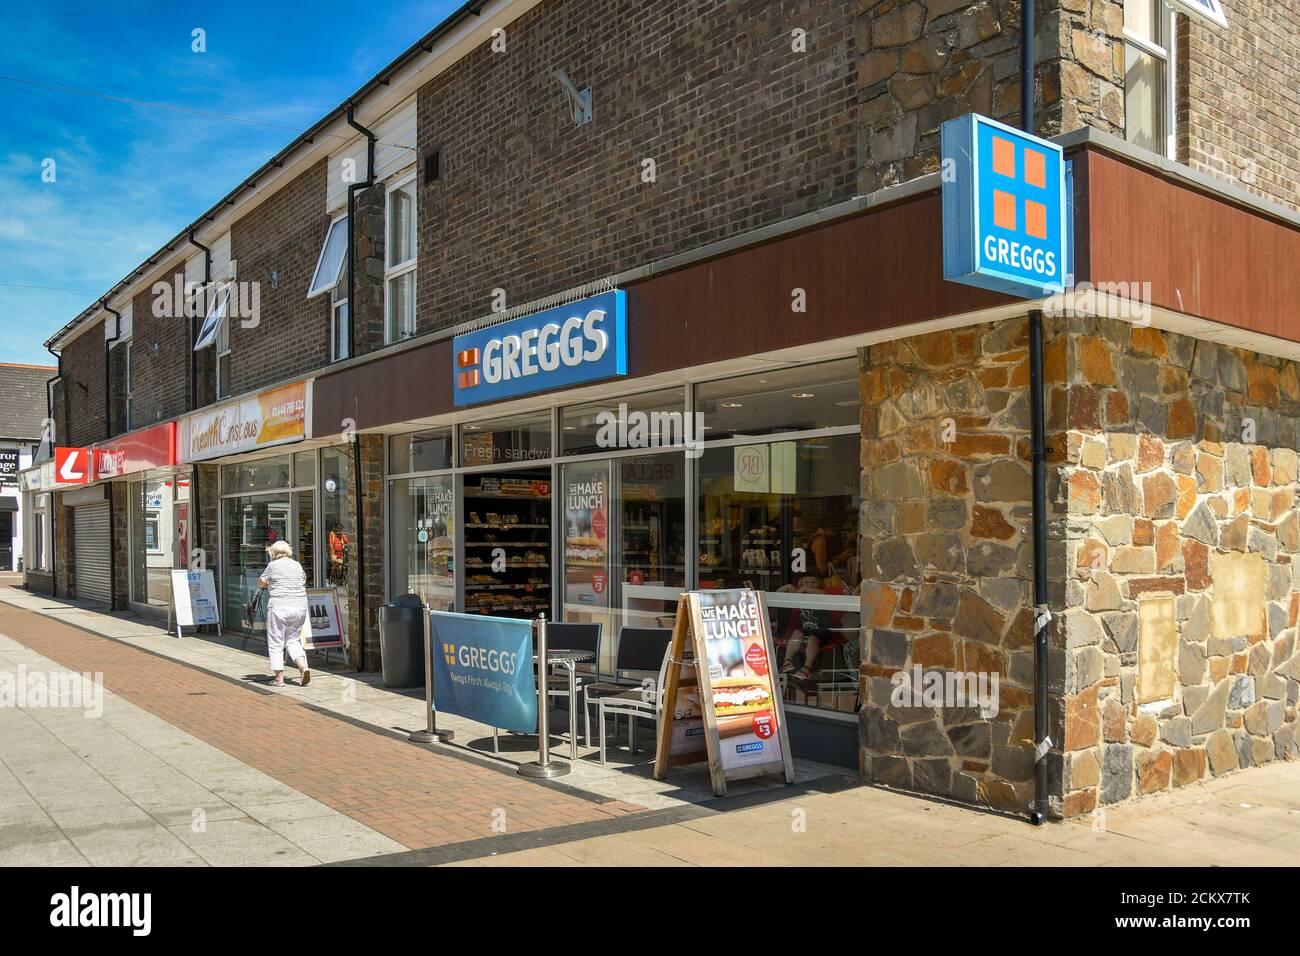 Llantwit Major, Vale of Glamorgan, Wales - July 2018: Exterior view of the branch of Greggs bakery in Llantwit Major Stock Photo